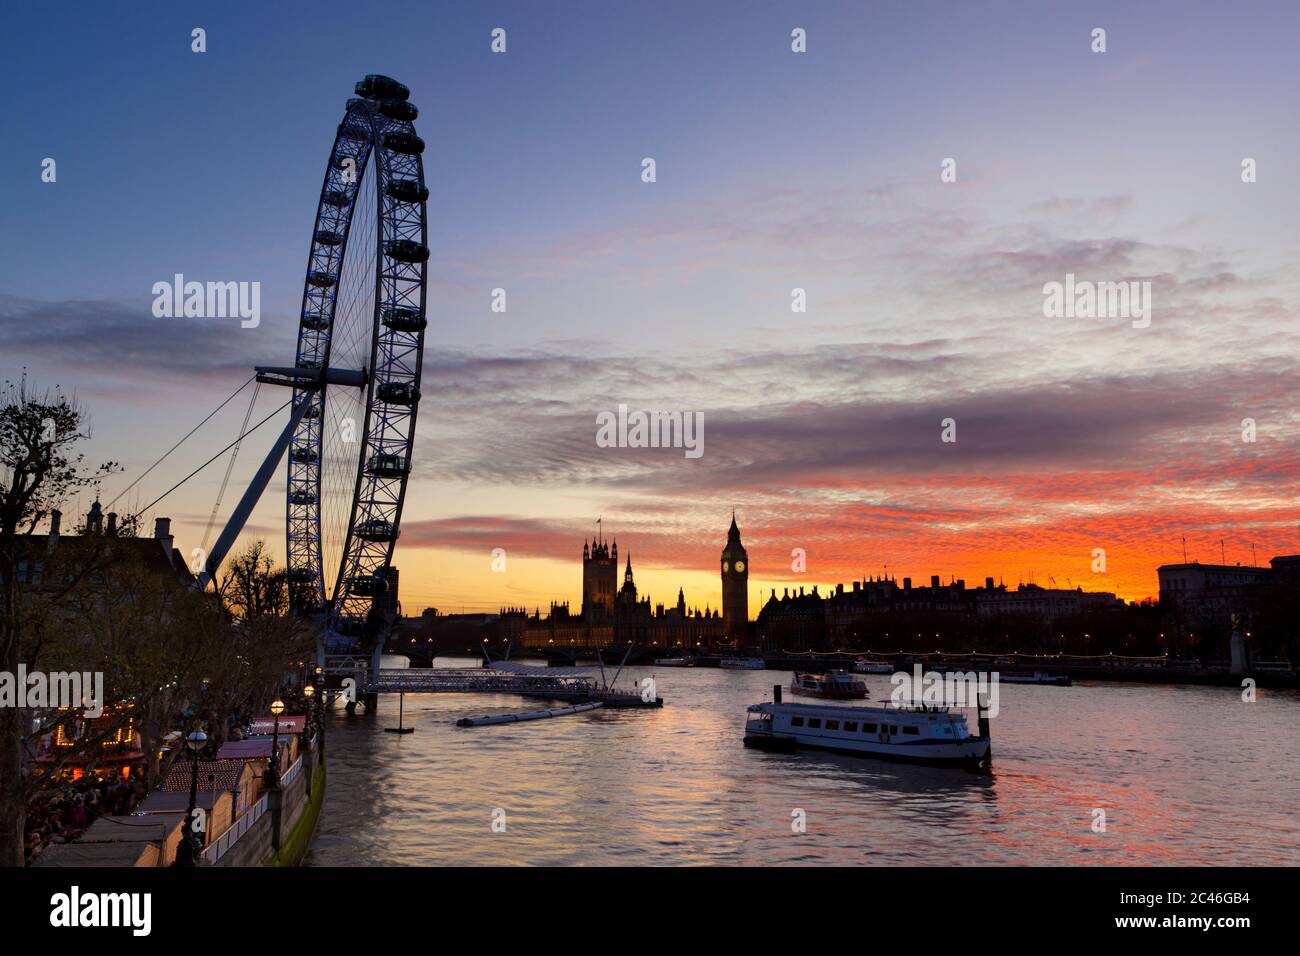 View over River Thames to London Eye and Houses of Parliament at sunset, South Bank, London, England, UK, Europe Stock Photo